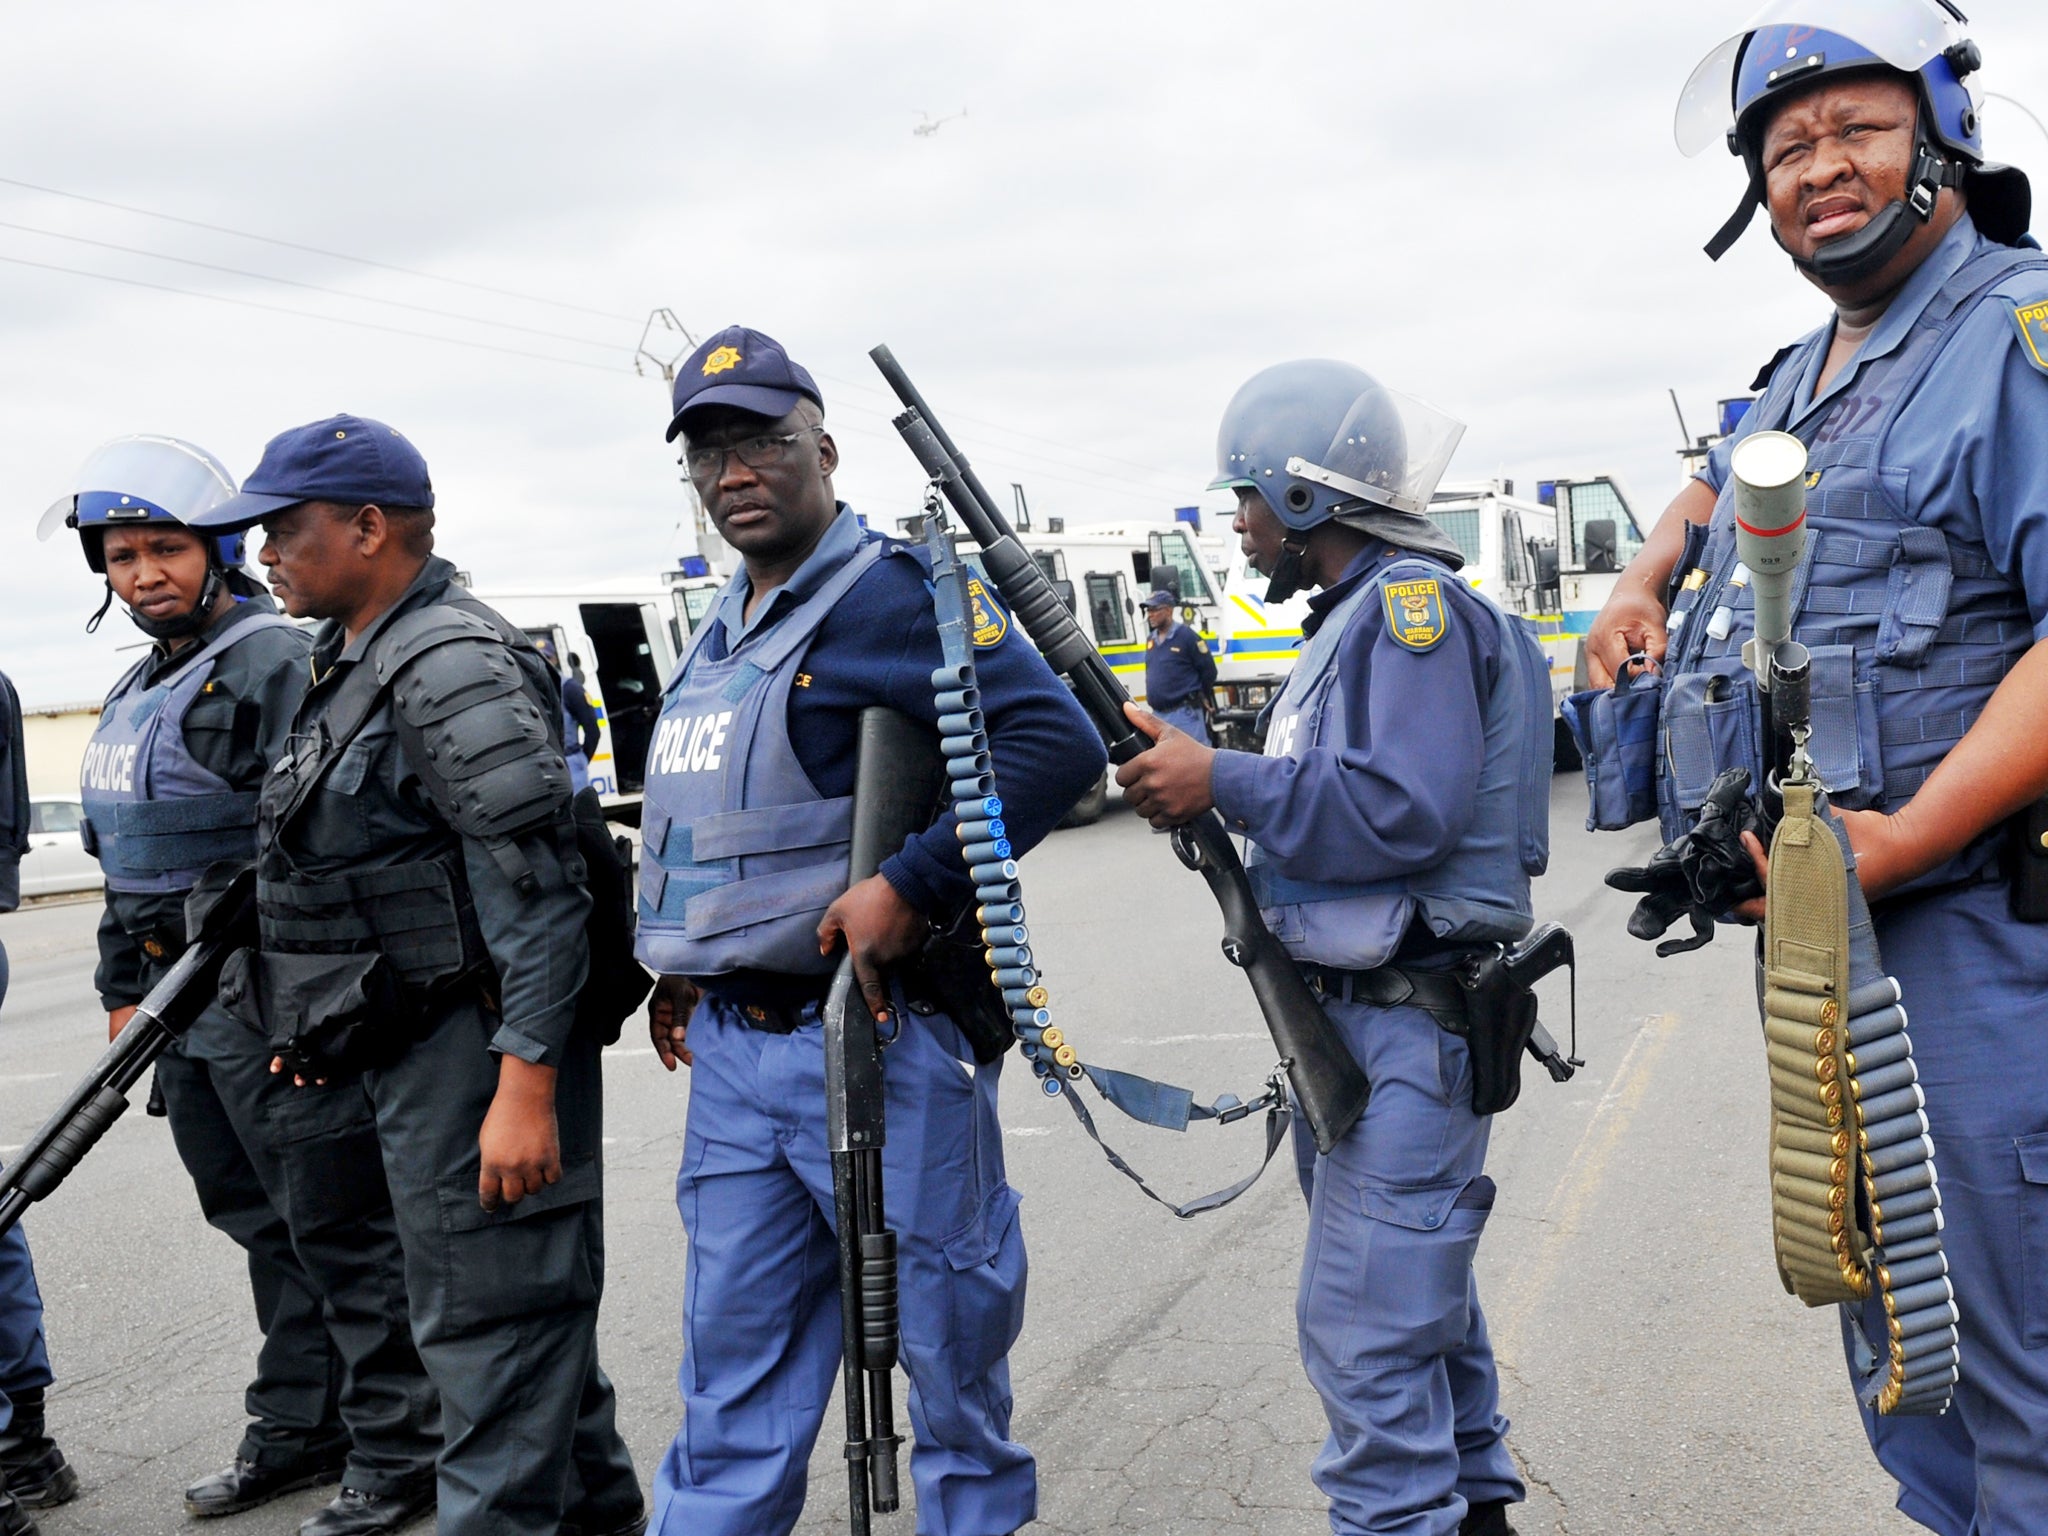 South Africa police can be heavily armed